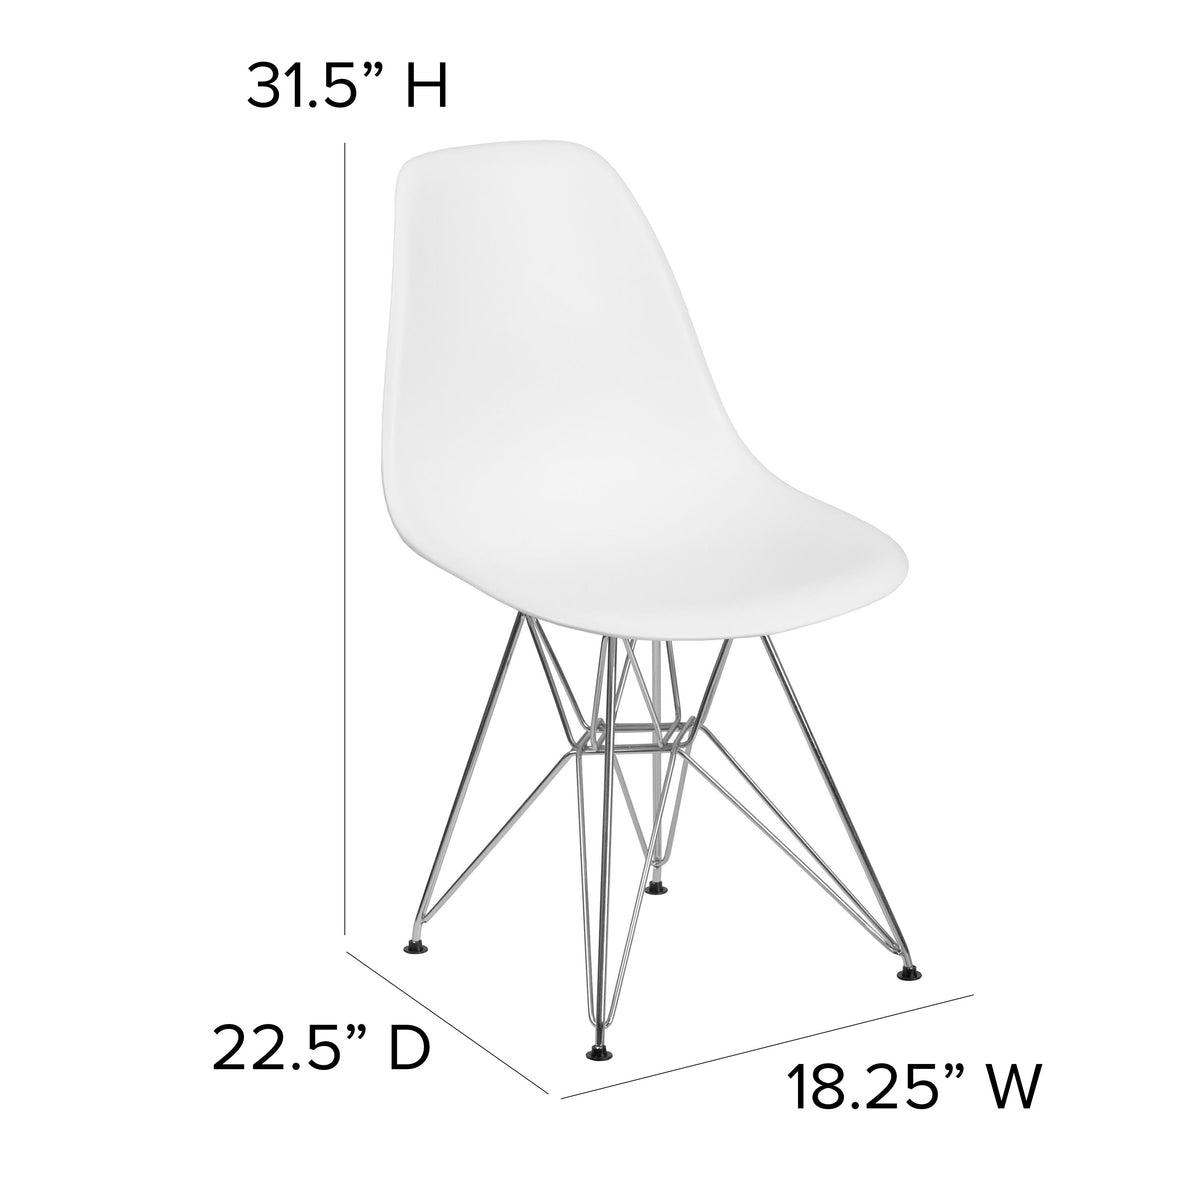 White |#| White Plastic Chair w/ Chrome Base - Hospitality Seating - Accent and Side Chair